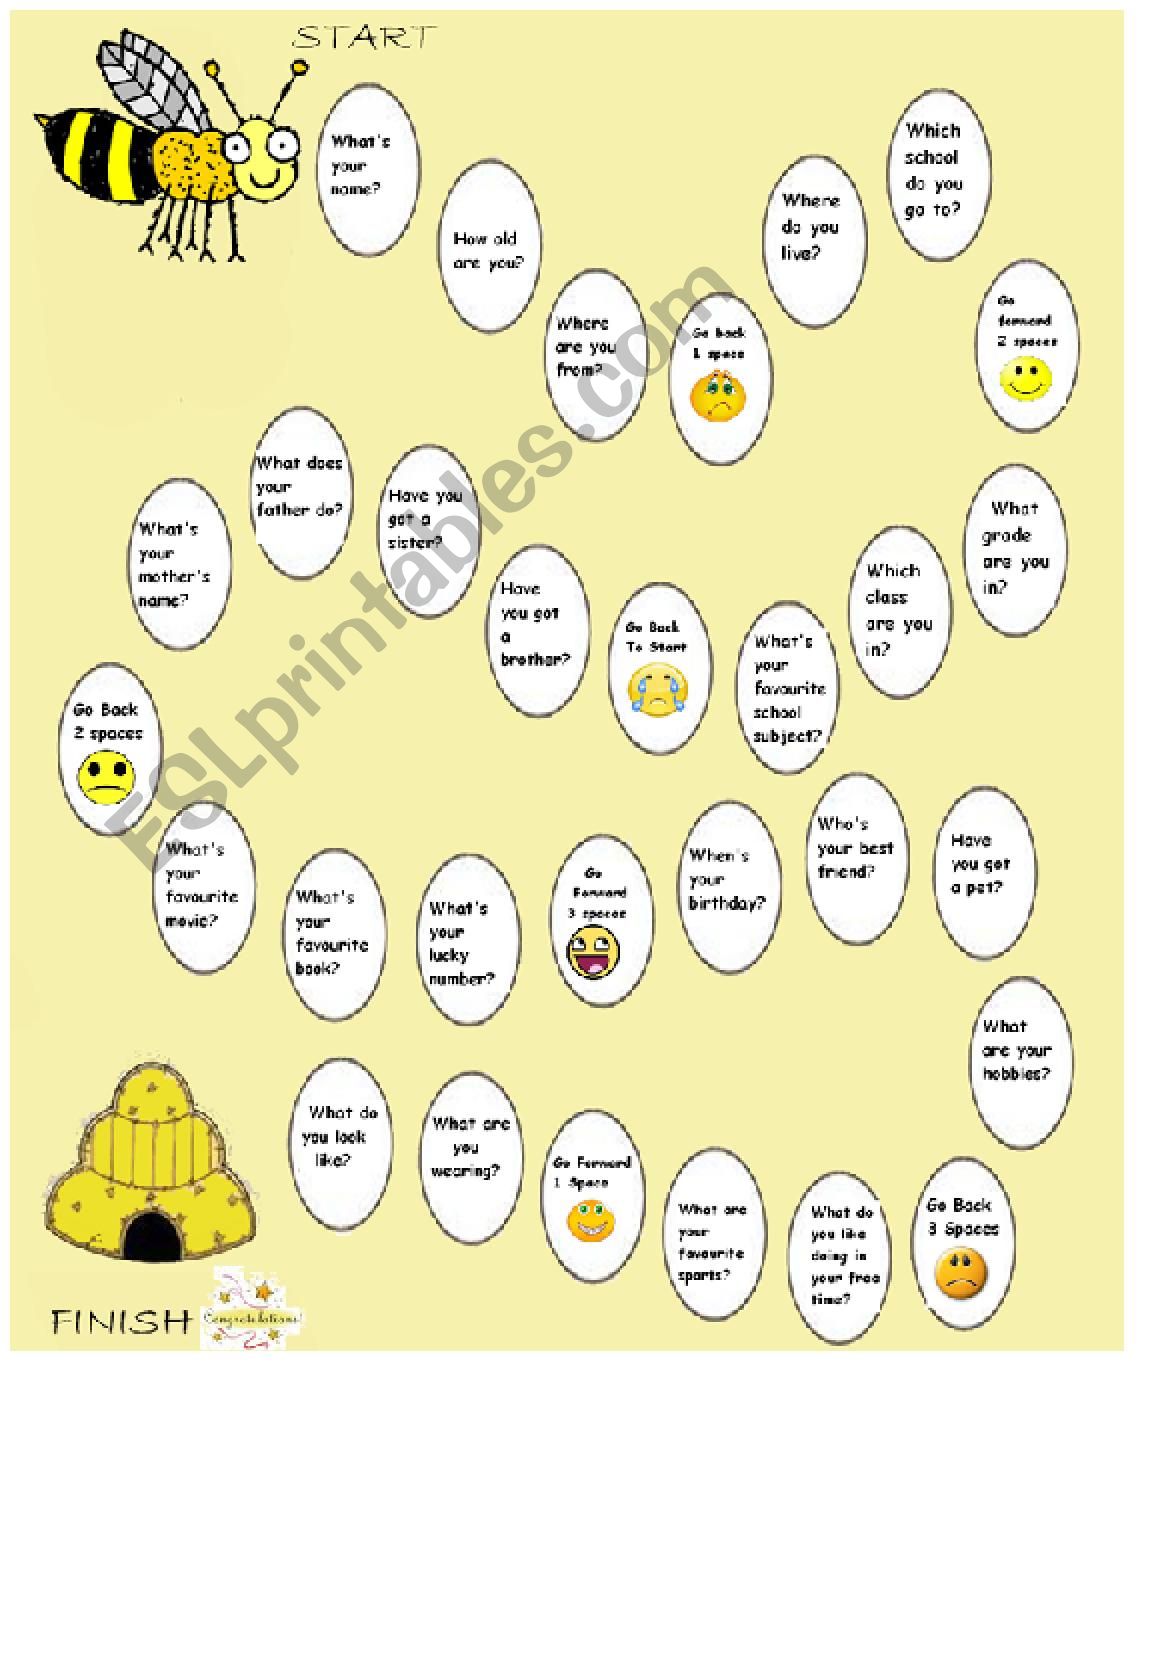 Board Game- All about me worksheet